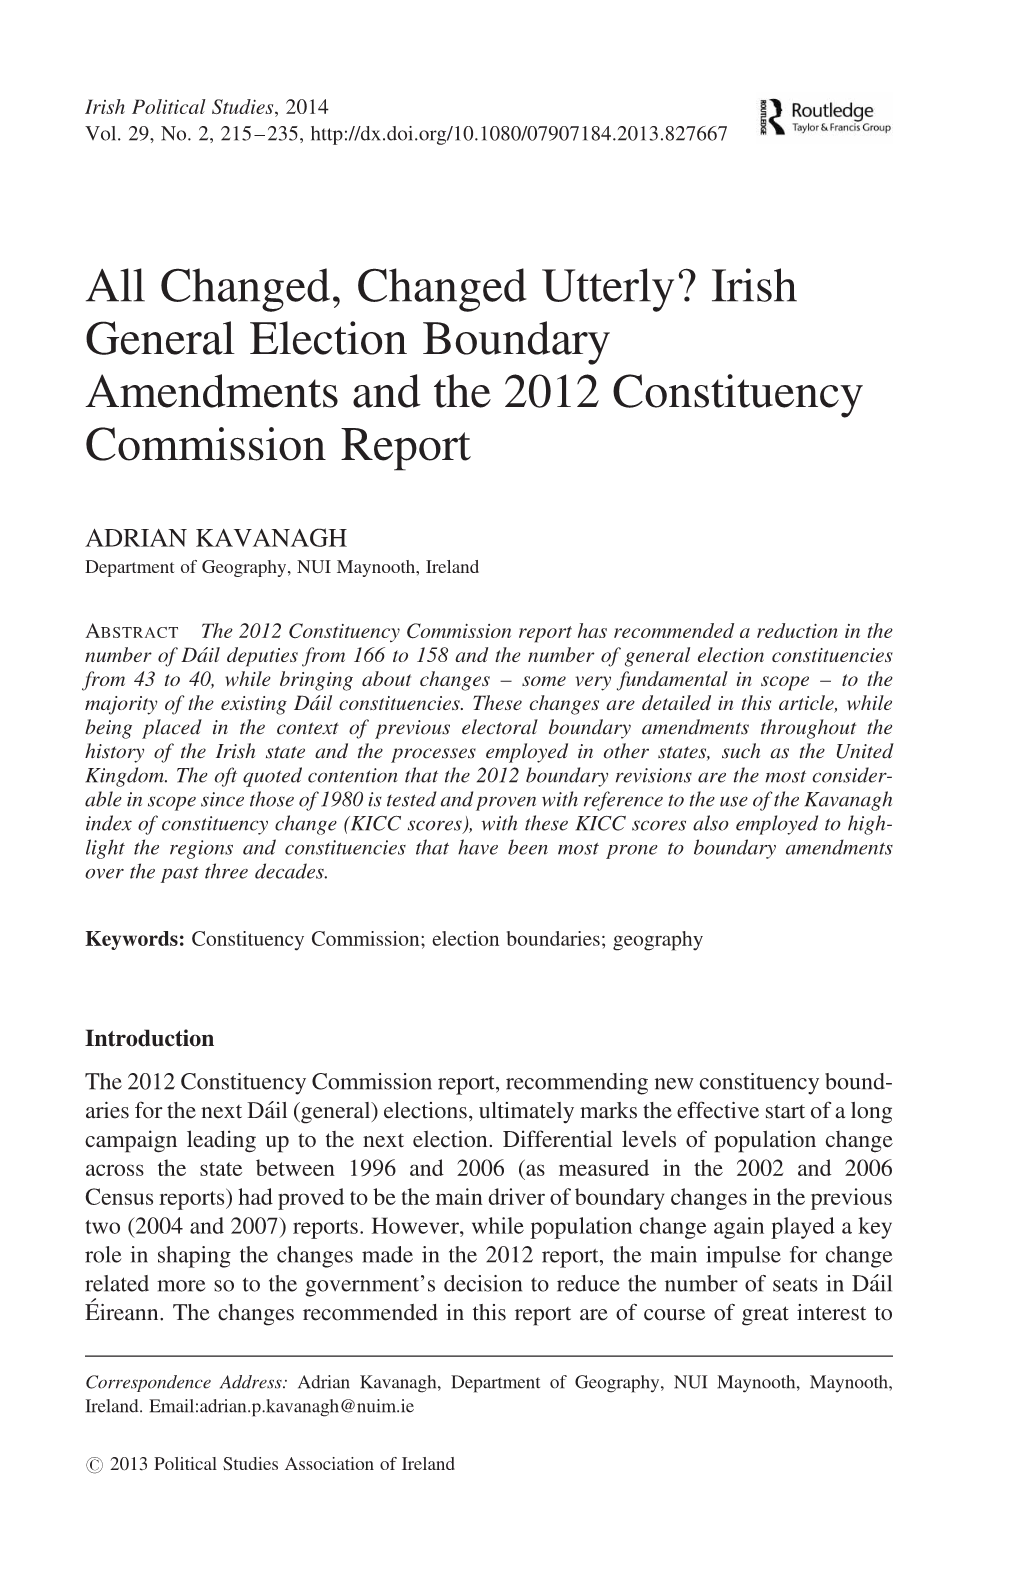 All Changed, Changed Utterly? Irish General Election Boundary Amendments and the 2012 Constituency Commission Report